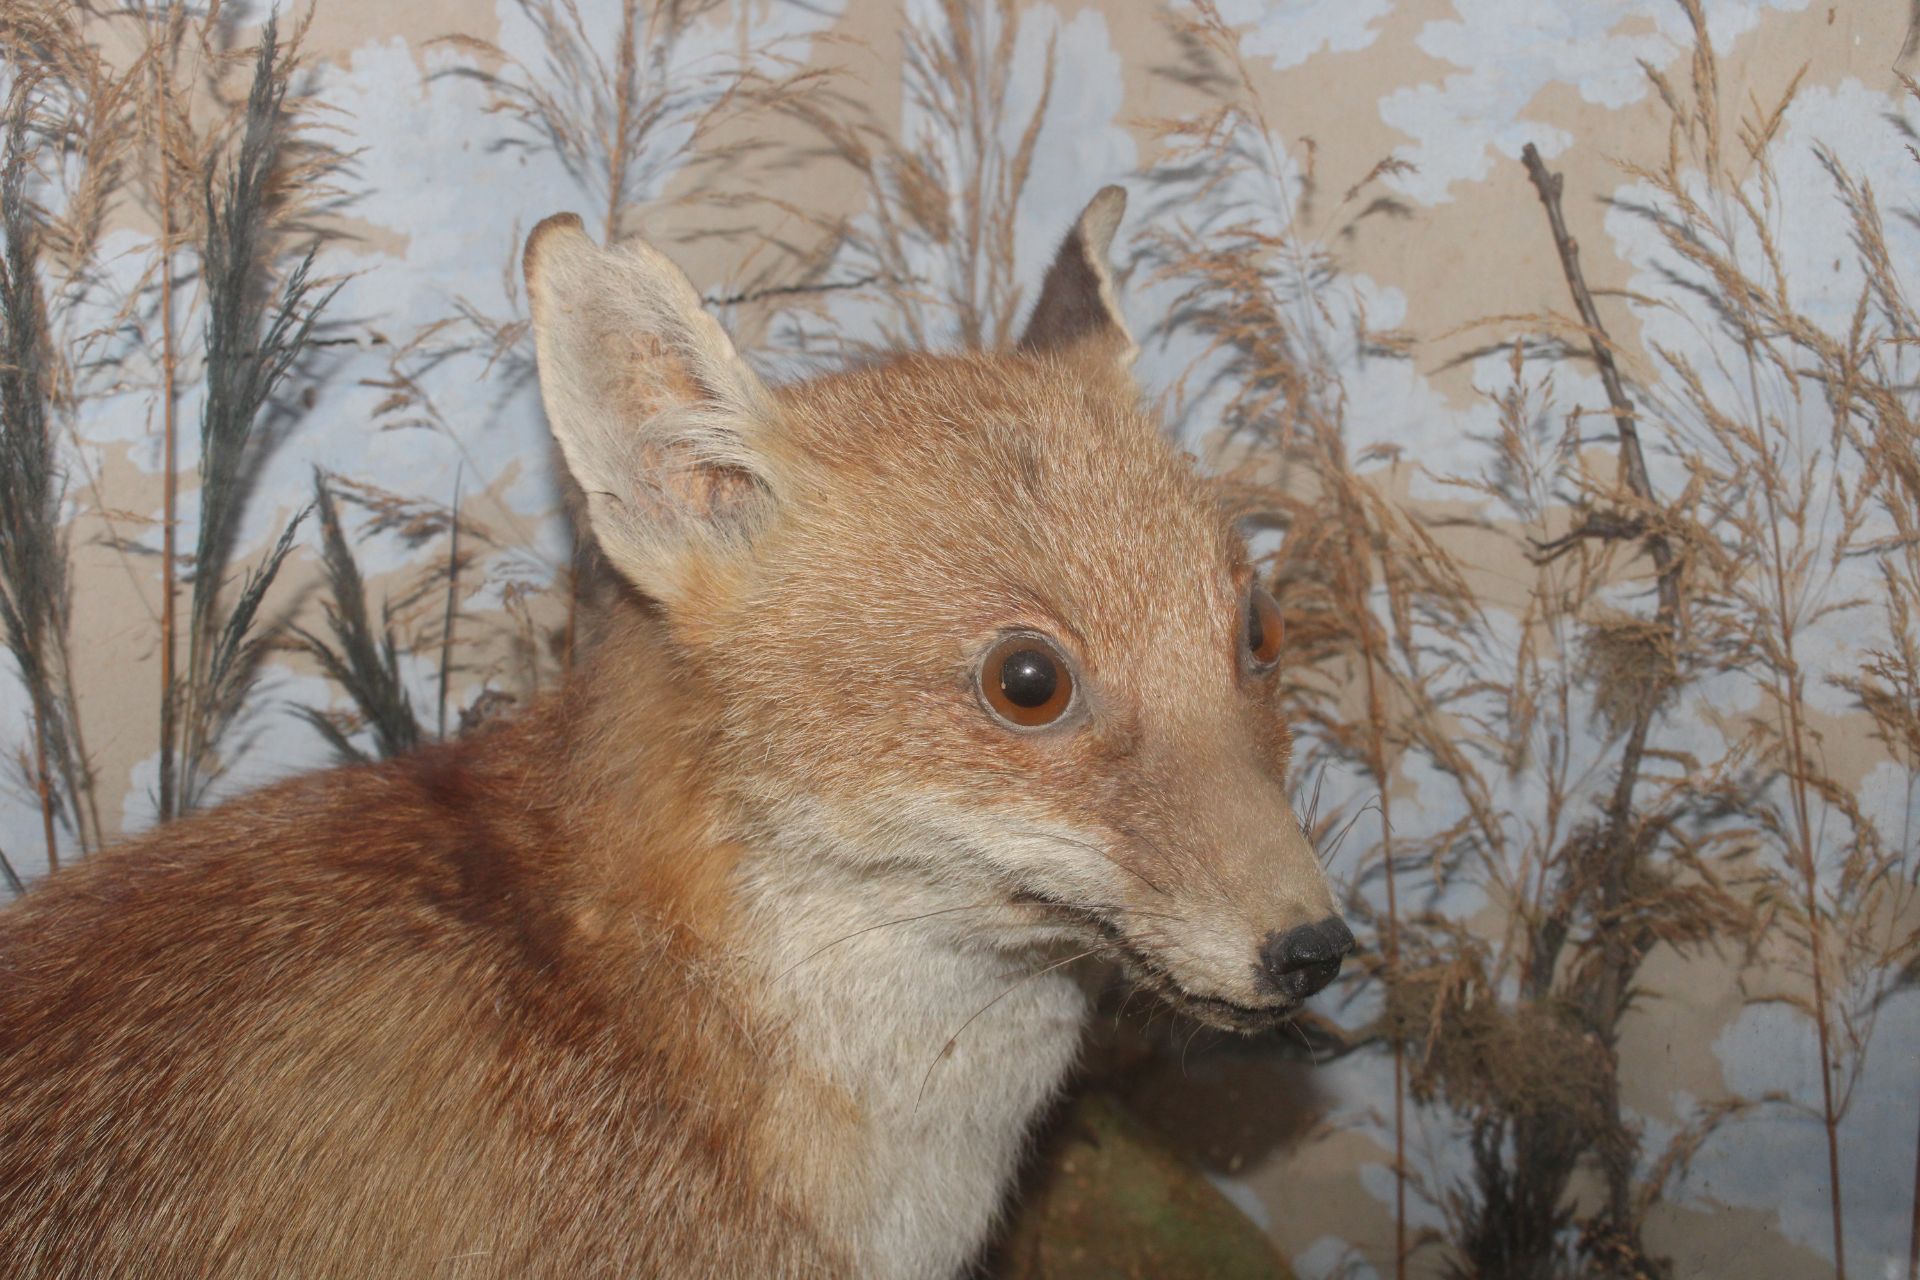 A cased and preserved study of a seated fox amongs - Image 3 of 4